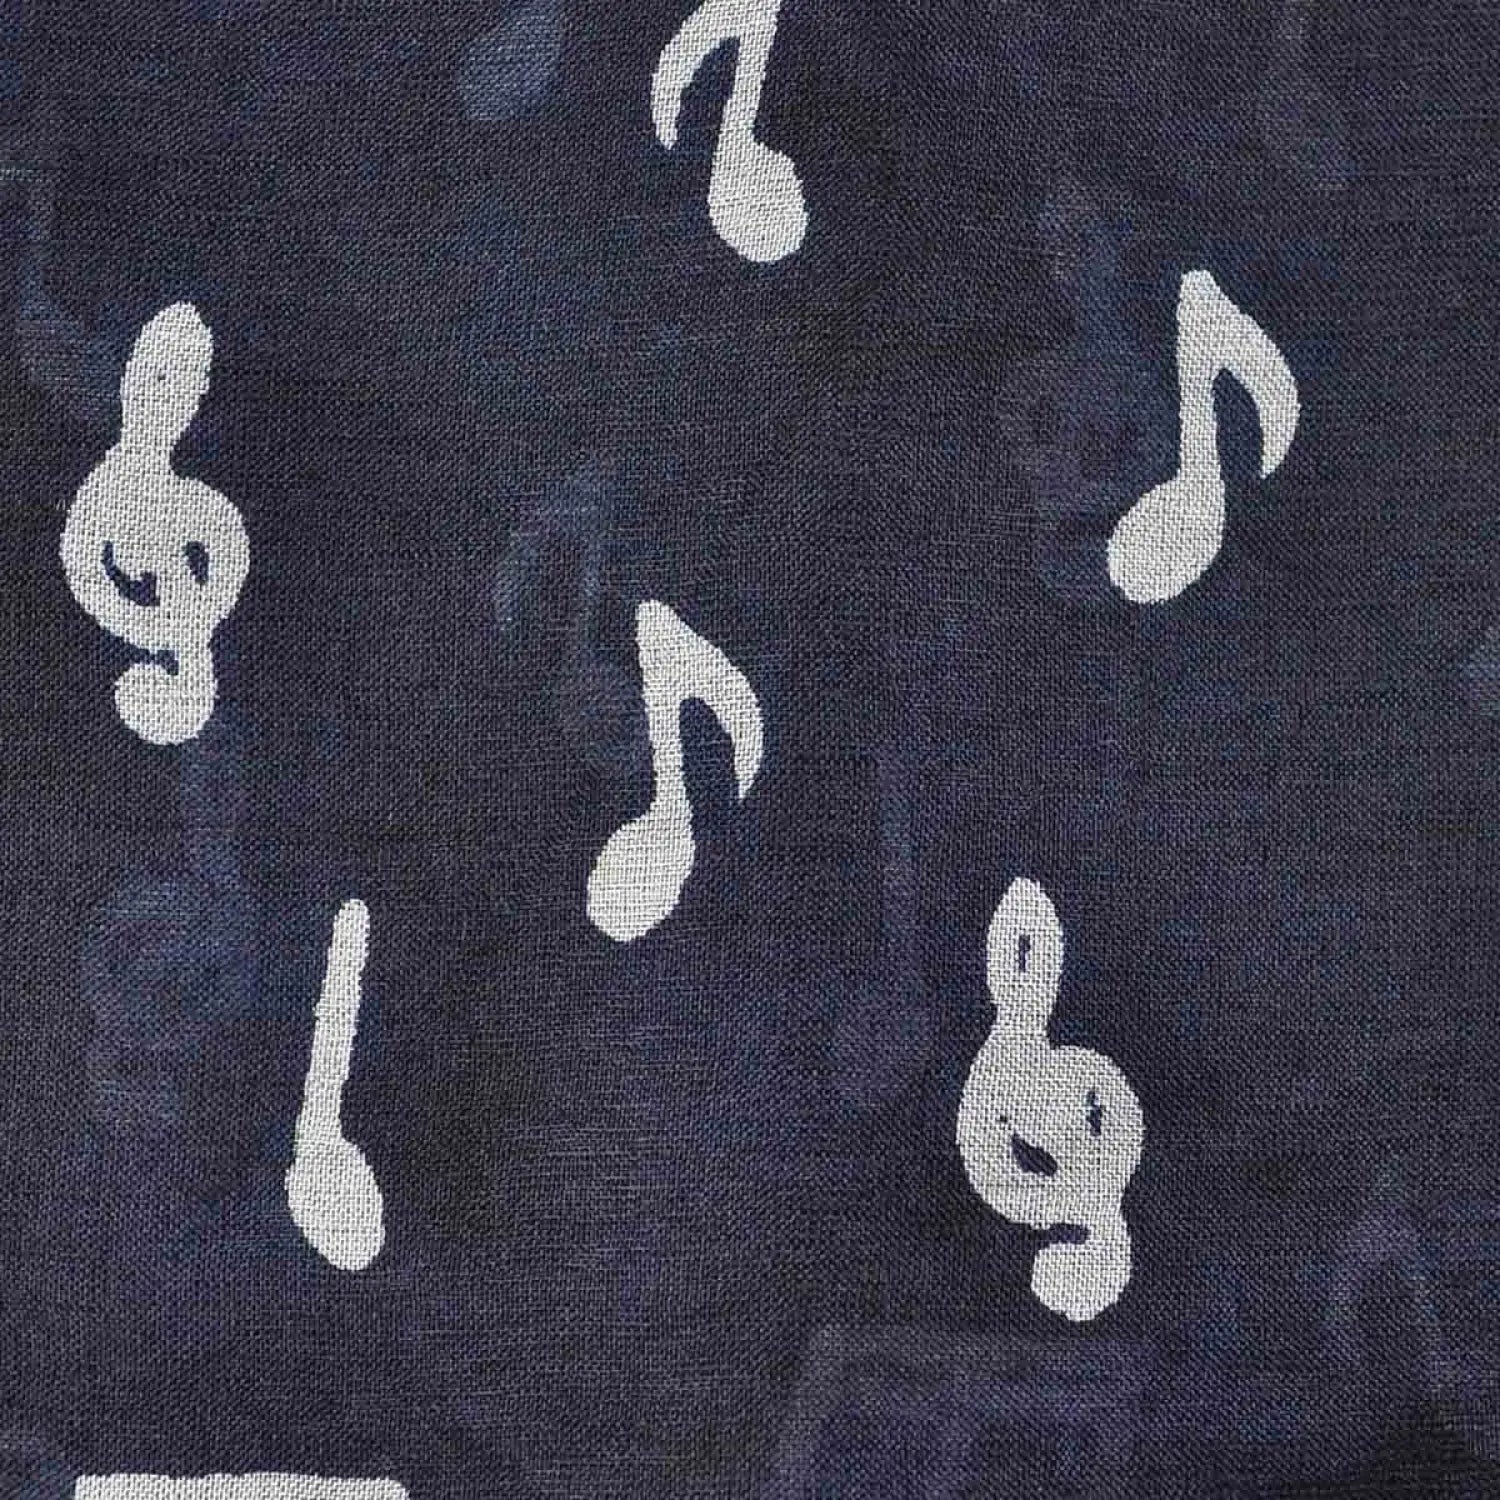 Black and white musical note pattern silk scarf.